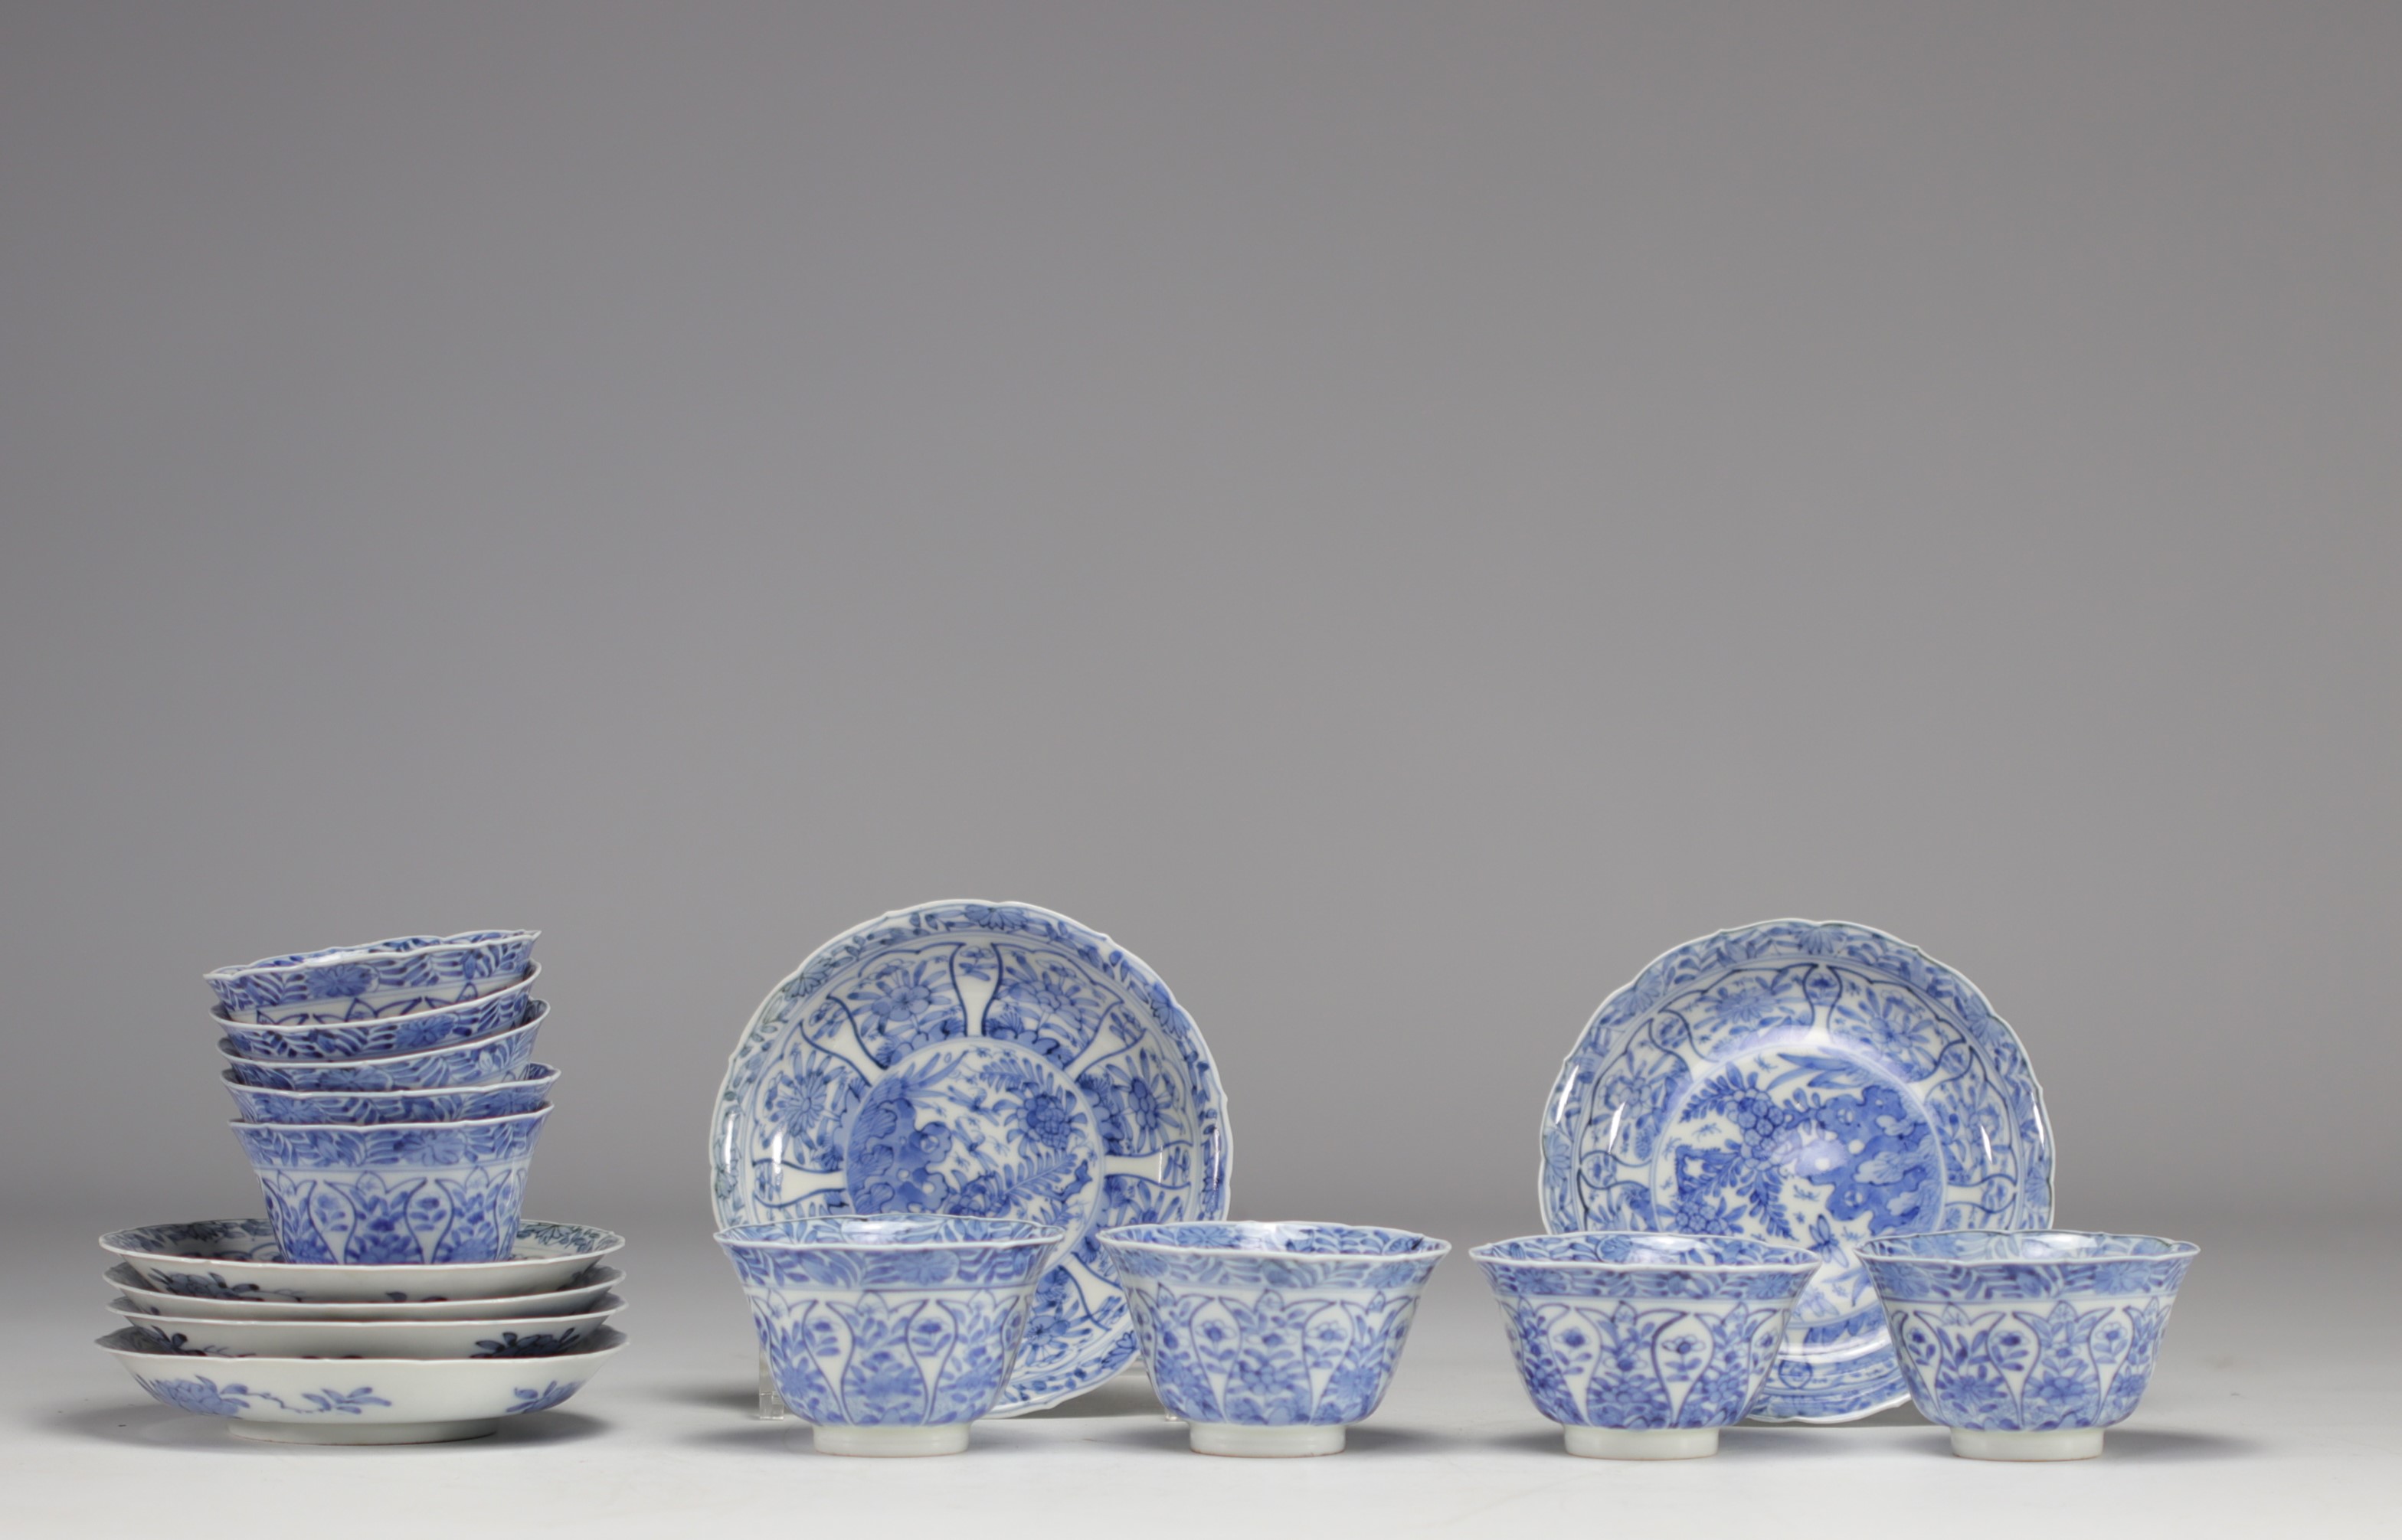 Set of white and blue bowls and saucers with various flower decorations from 18th century